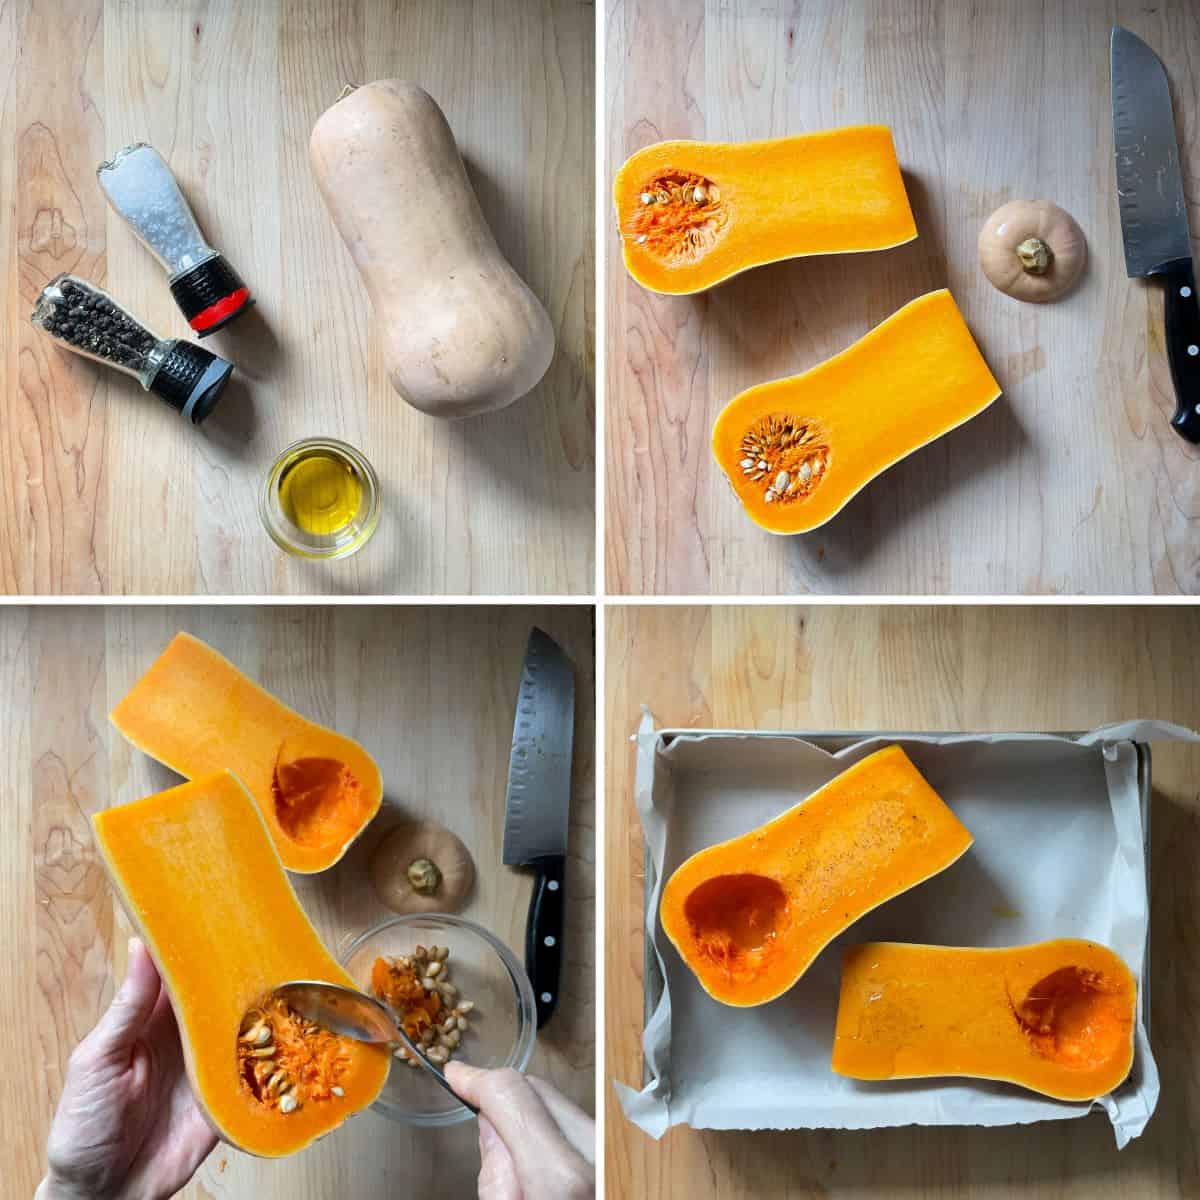 Step by step process to prepare the butternut for roasting.